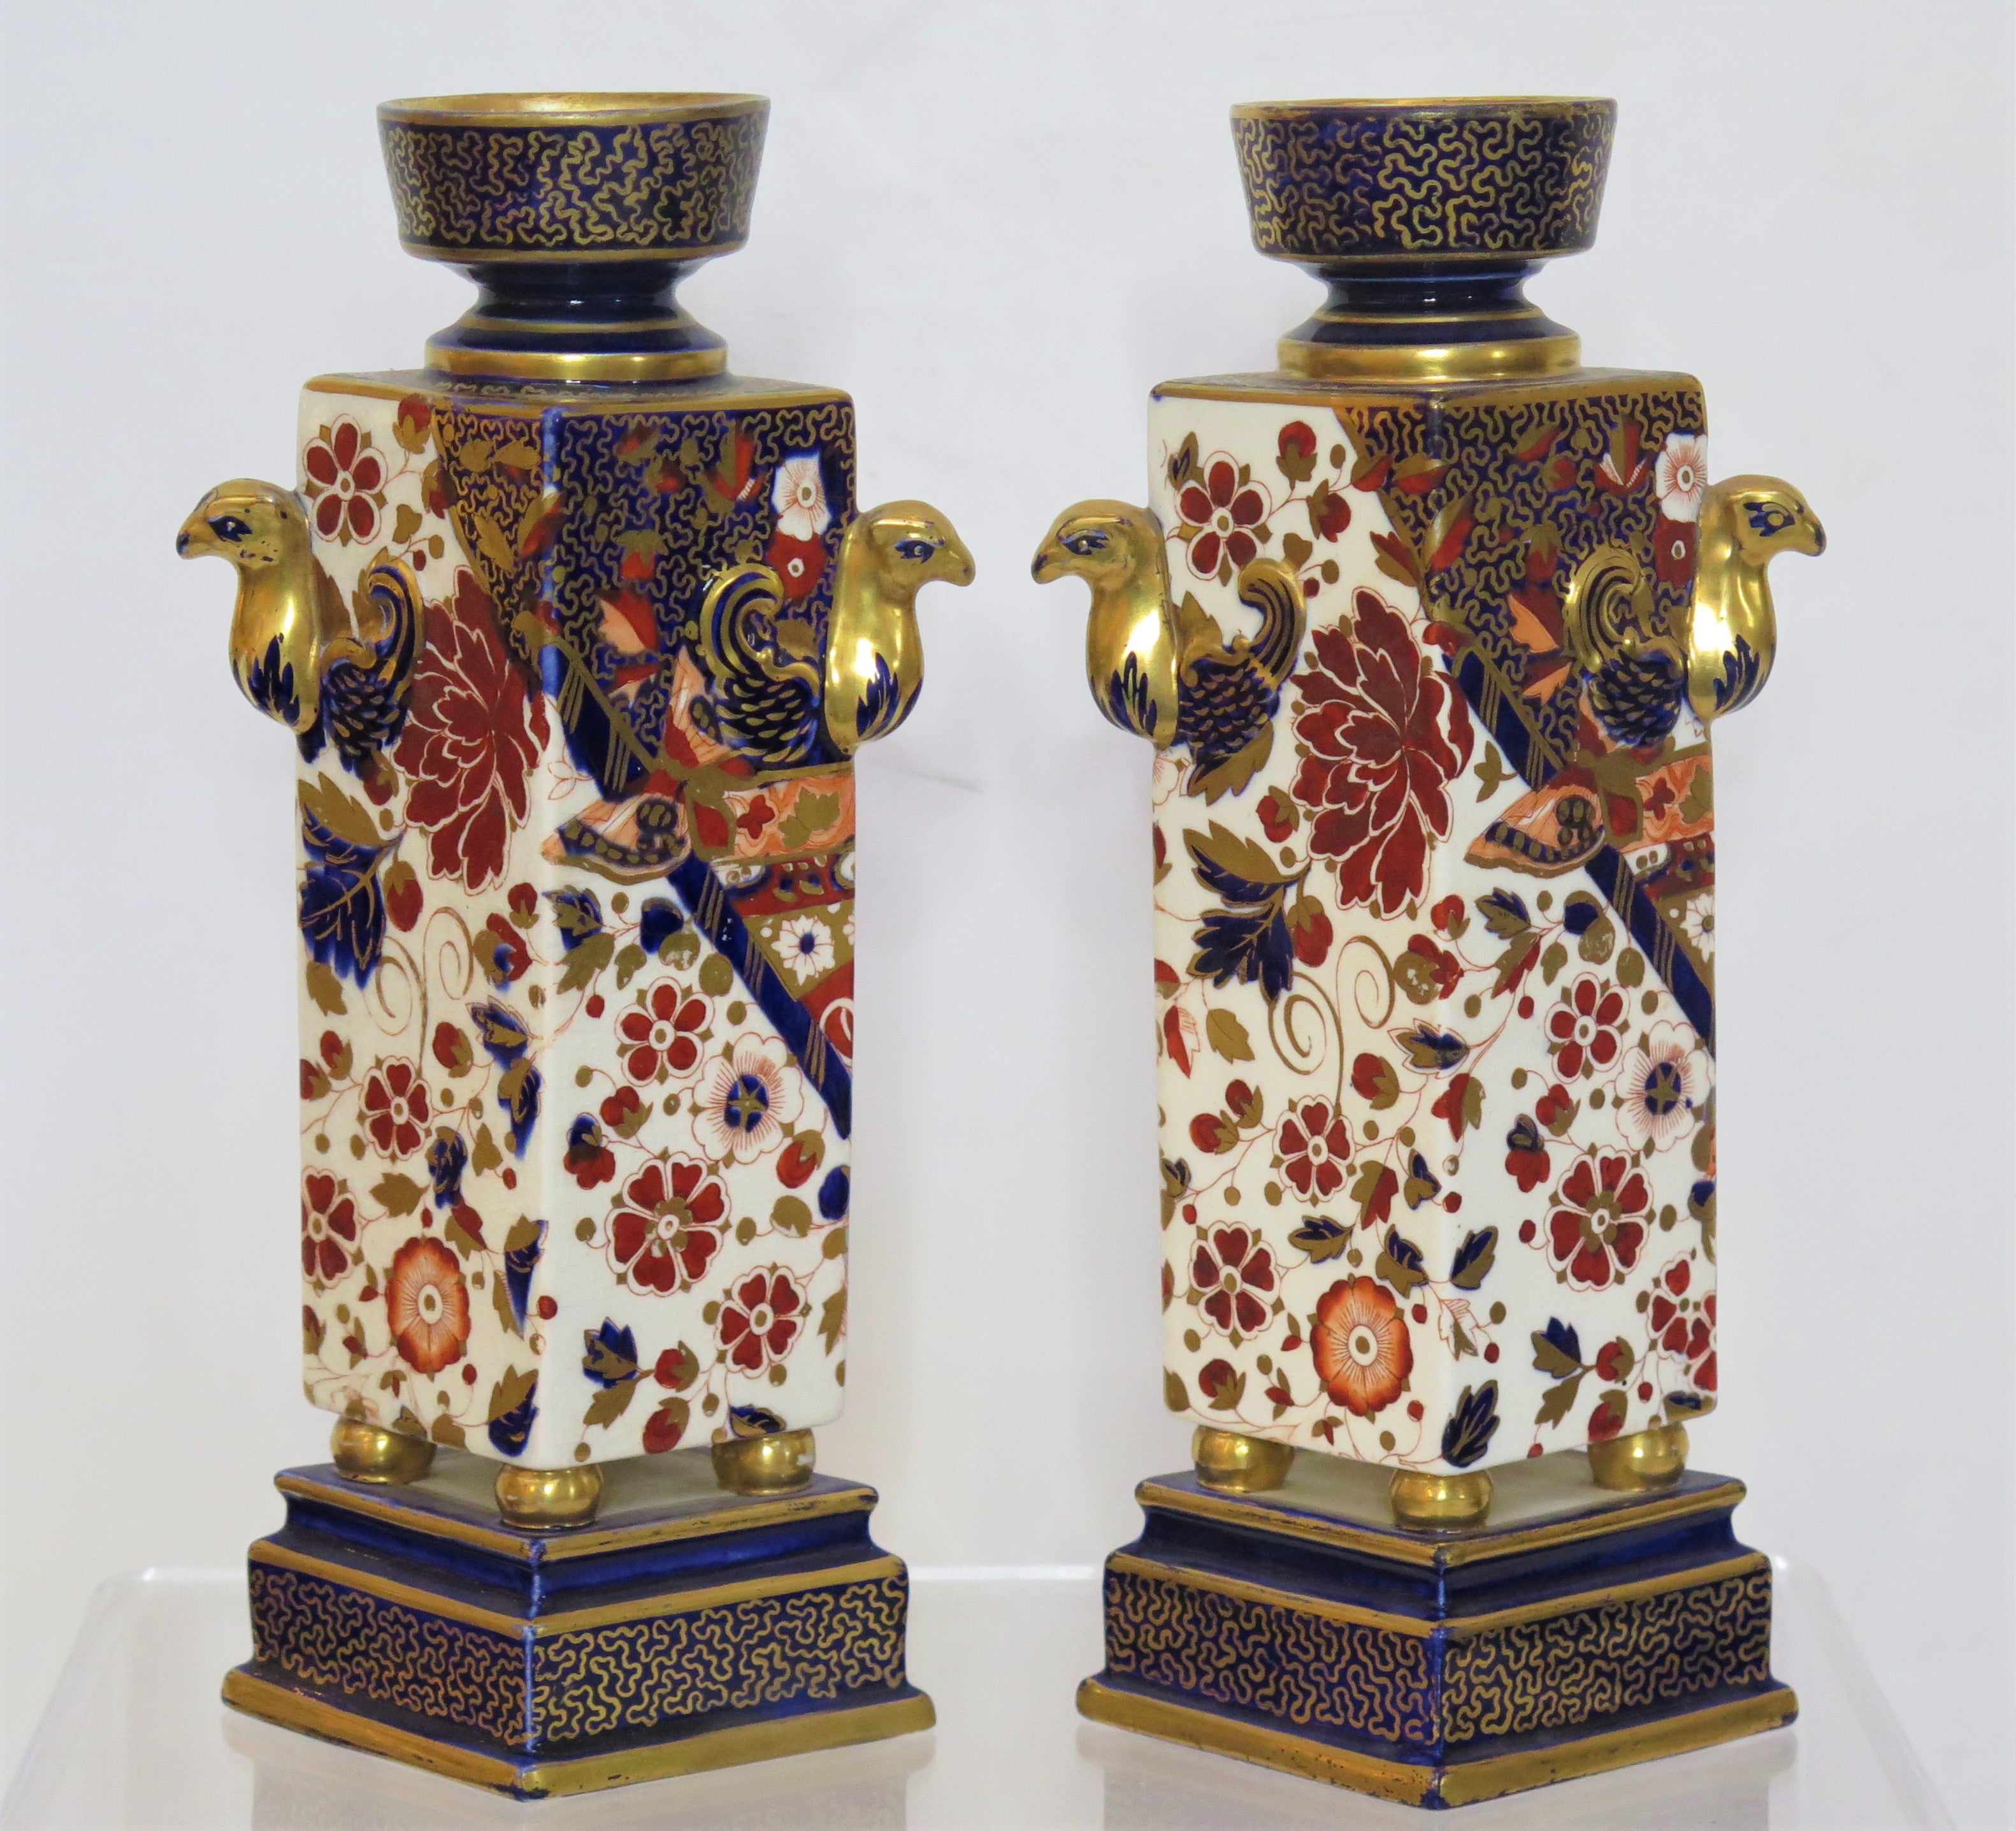 English Derby Candle Holders